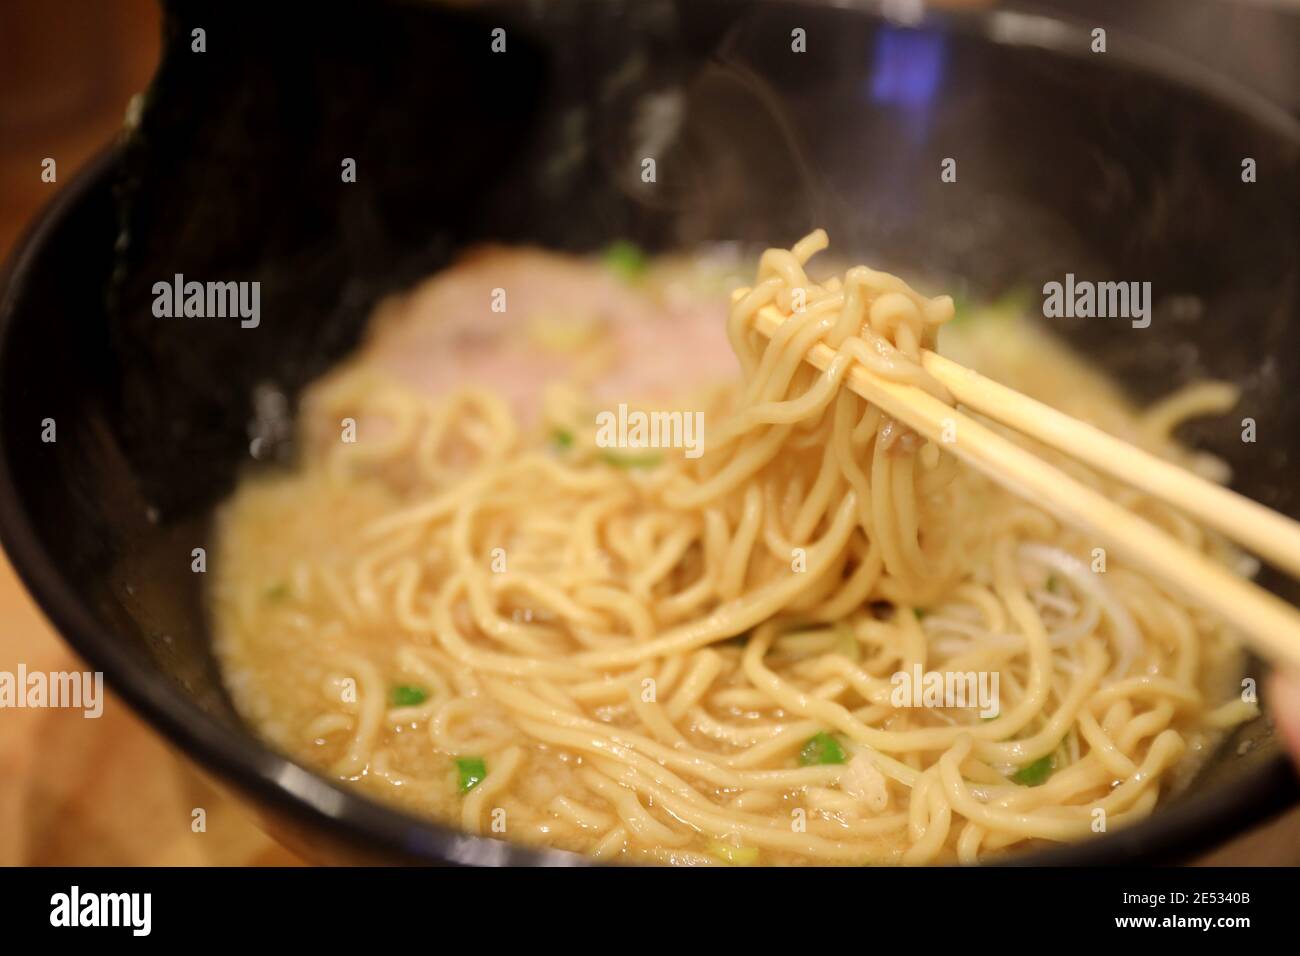 Japanese Noodle ramen Local japanese food in restaurant Stock Photo